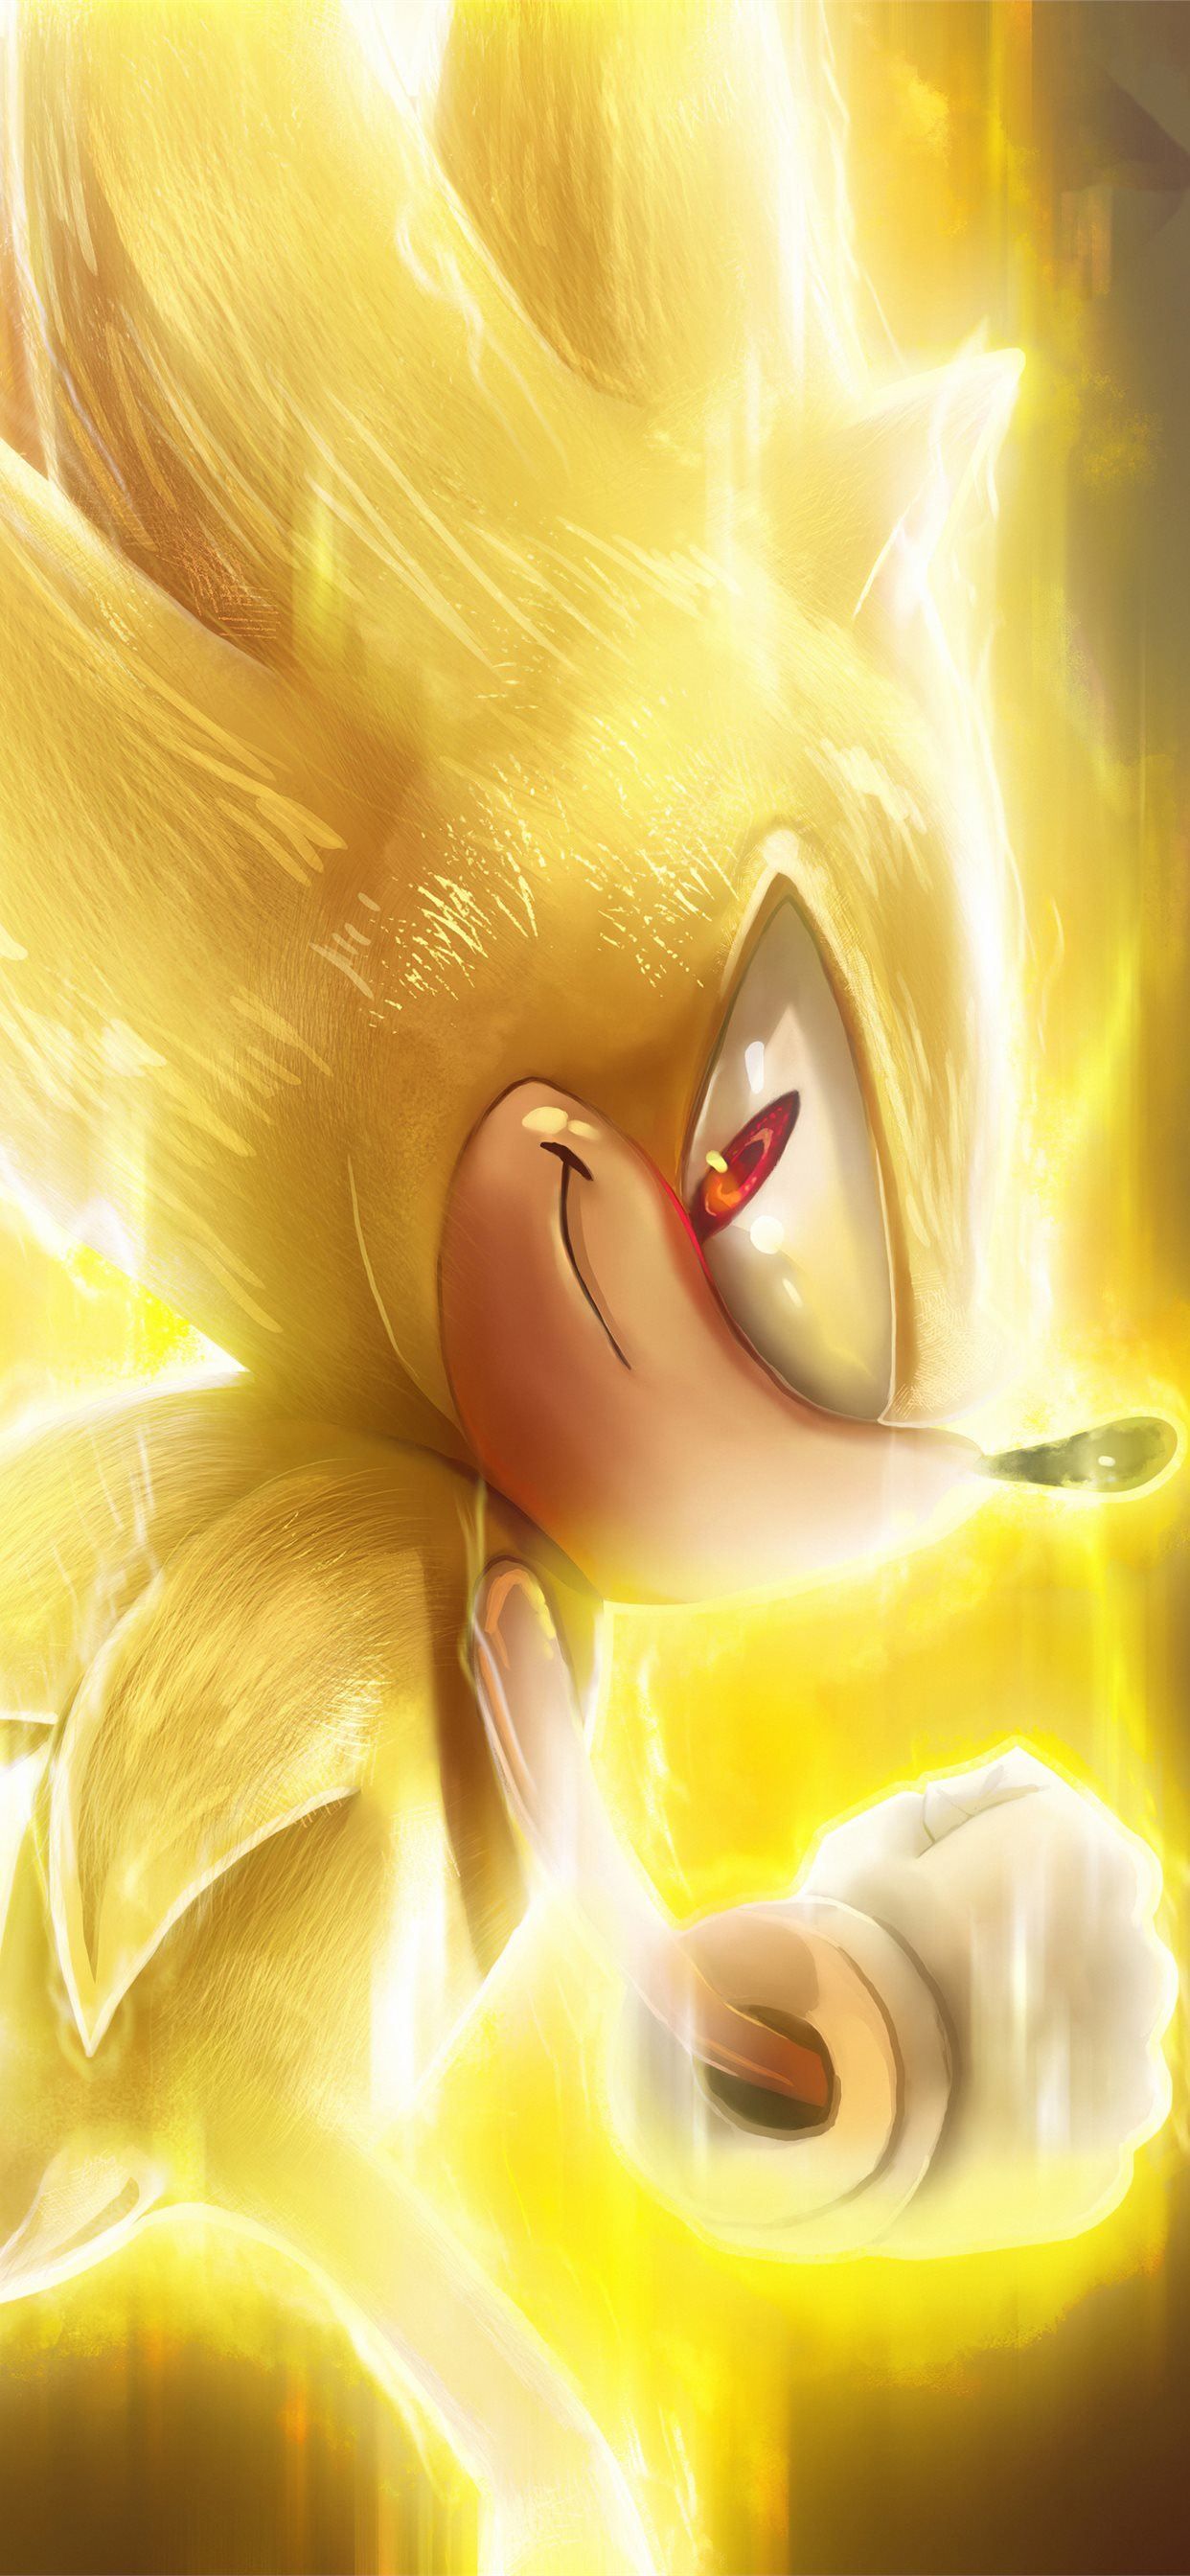 sonic the hedgehog powers iPhone 11 Wallpaper Free Download